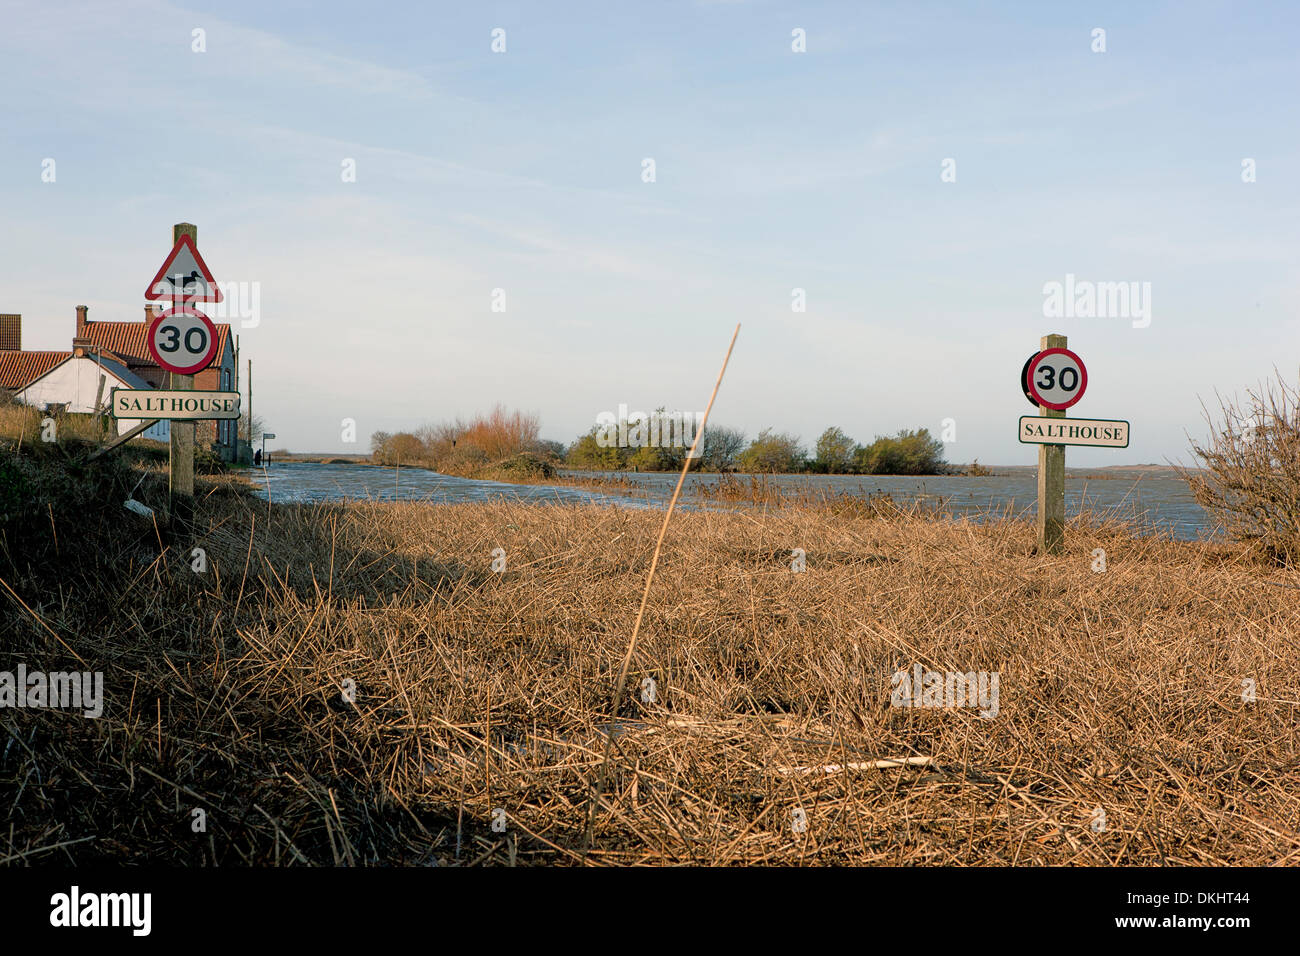 Cley, Norfolk, UK. 06th Dec, 2013. Flood waters from the biggest storm surge in 60 years inundate a coastal road in Cley in Norfolk UK, leaving reeds and branches strewn across the road. December 6 2013, 1pm Credit:  Tim James/The Gray Gallery/Alamy Live News Stock Photo